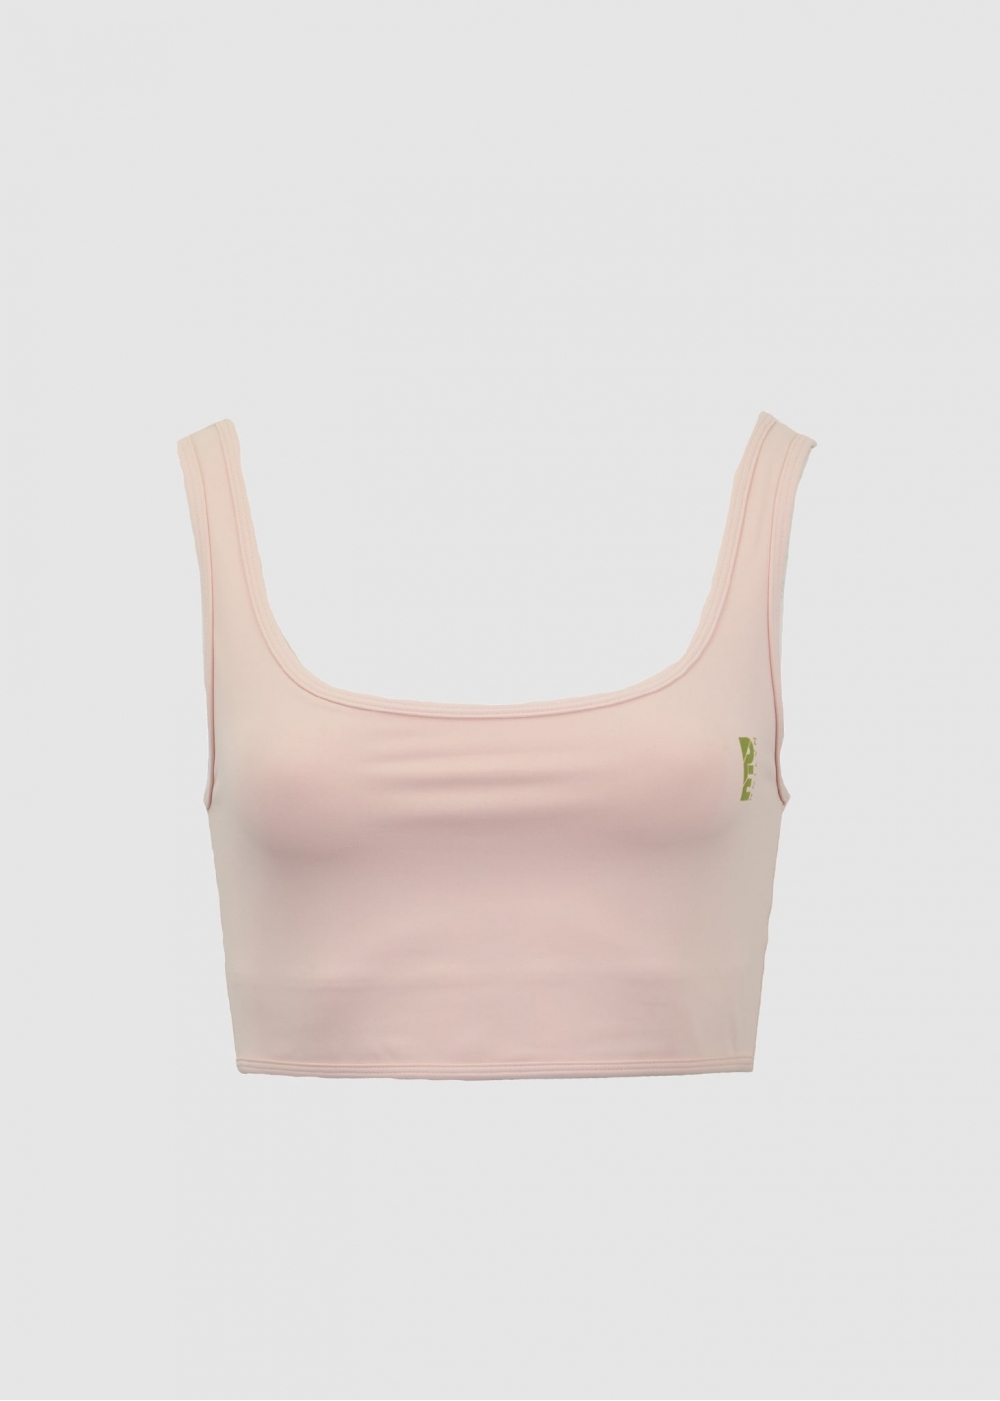 P.E Nation Womens All Around Sports Bra In Candy